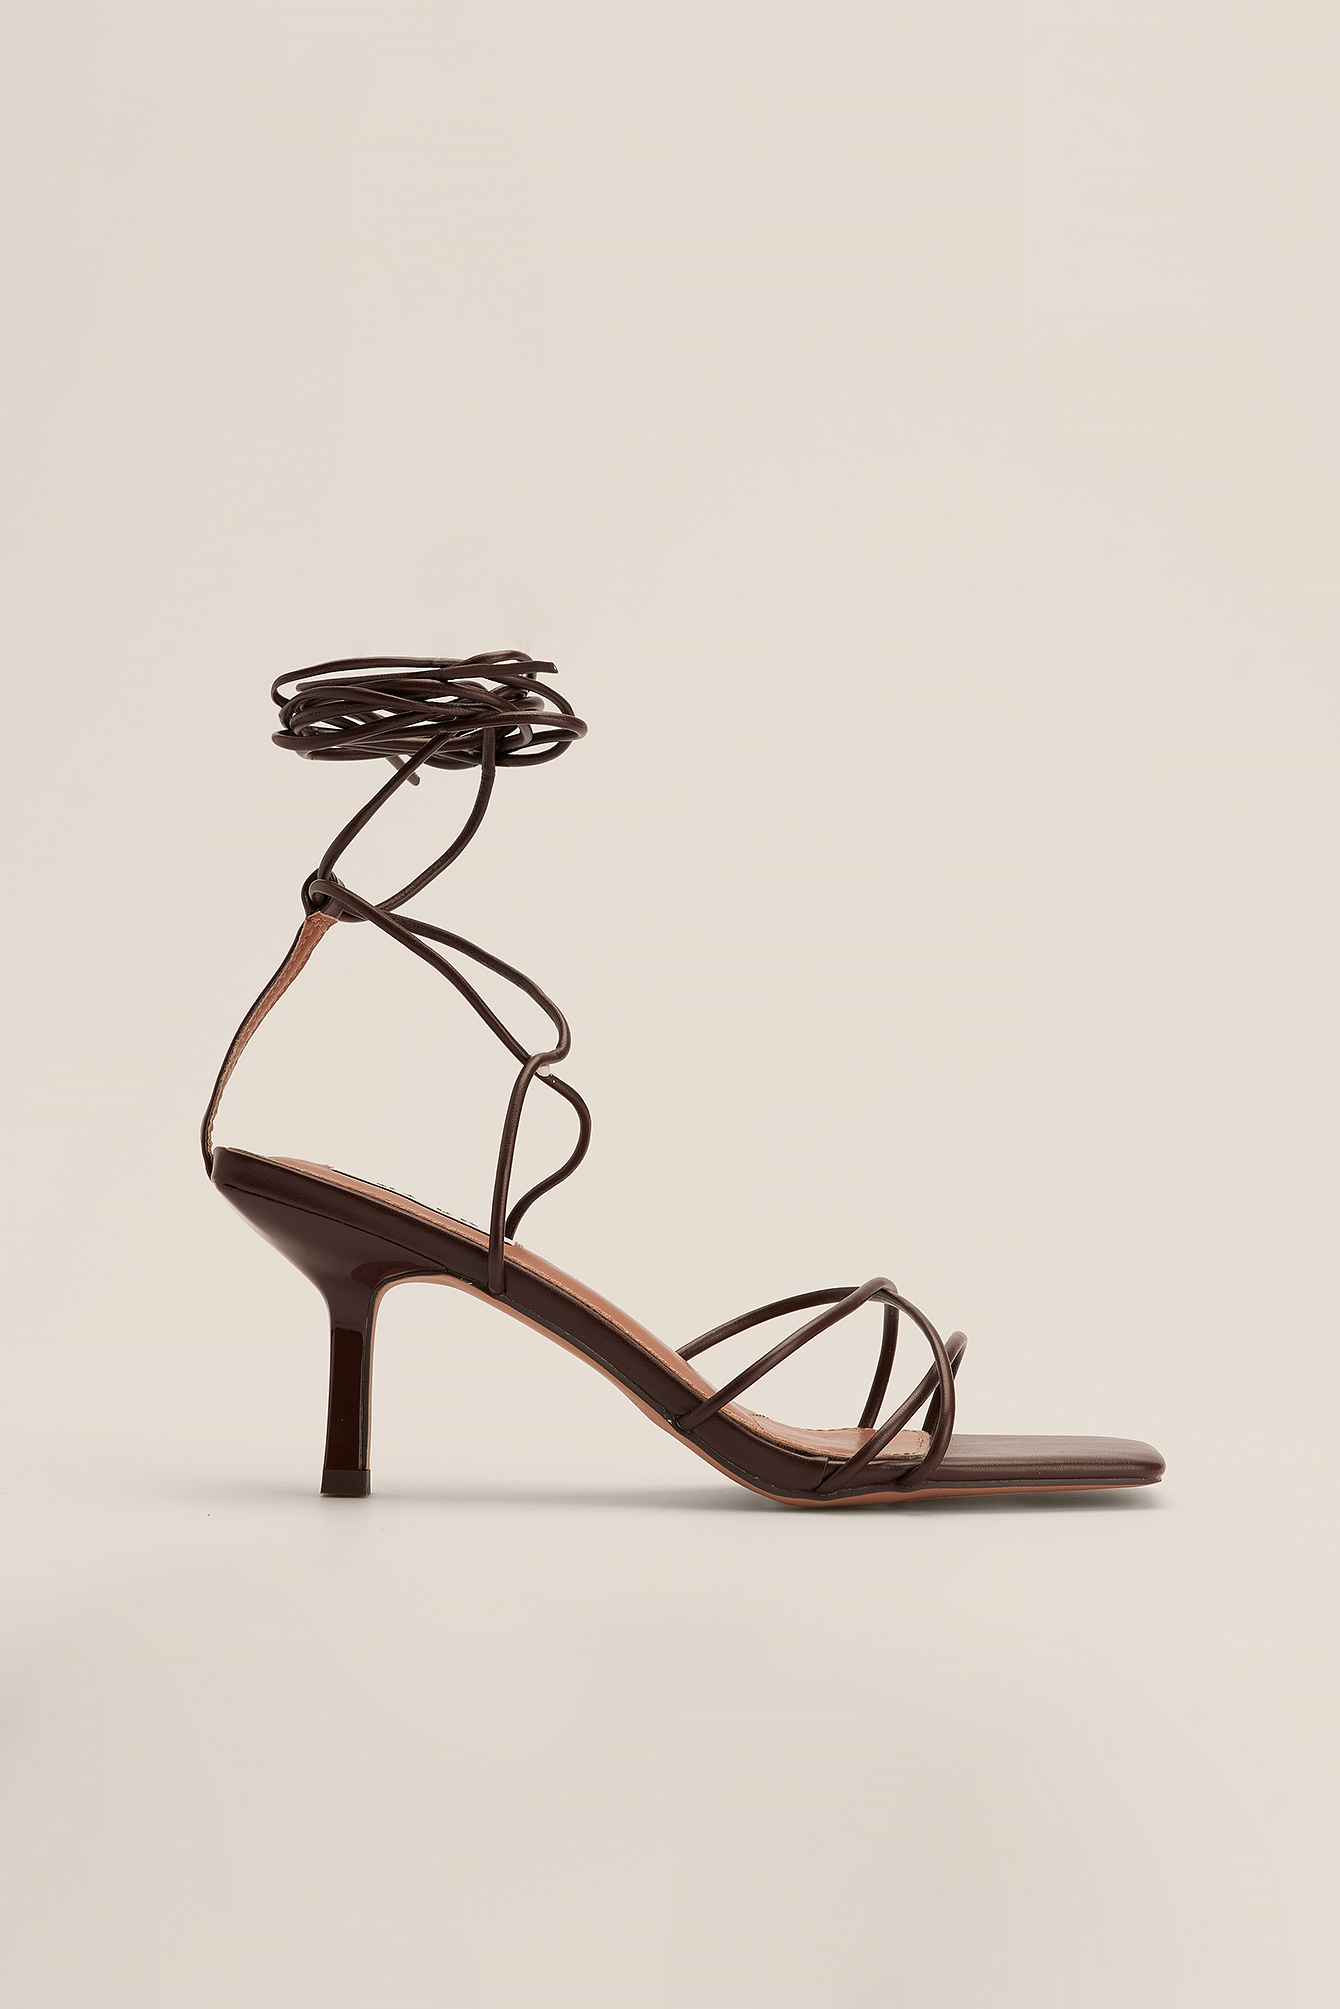 Shoes High-Heeled Sandals Strapped High-Heeled Sandals Buffalo girl Strapped High-Heeled Sandals black classic style 